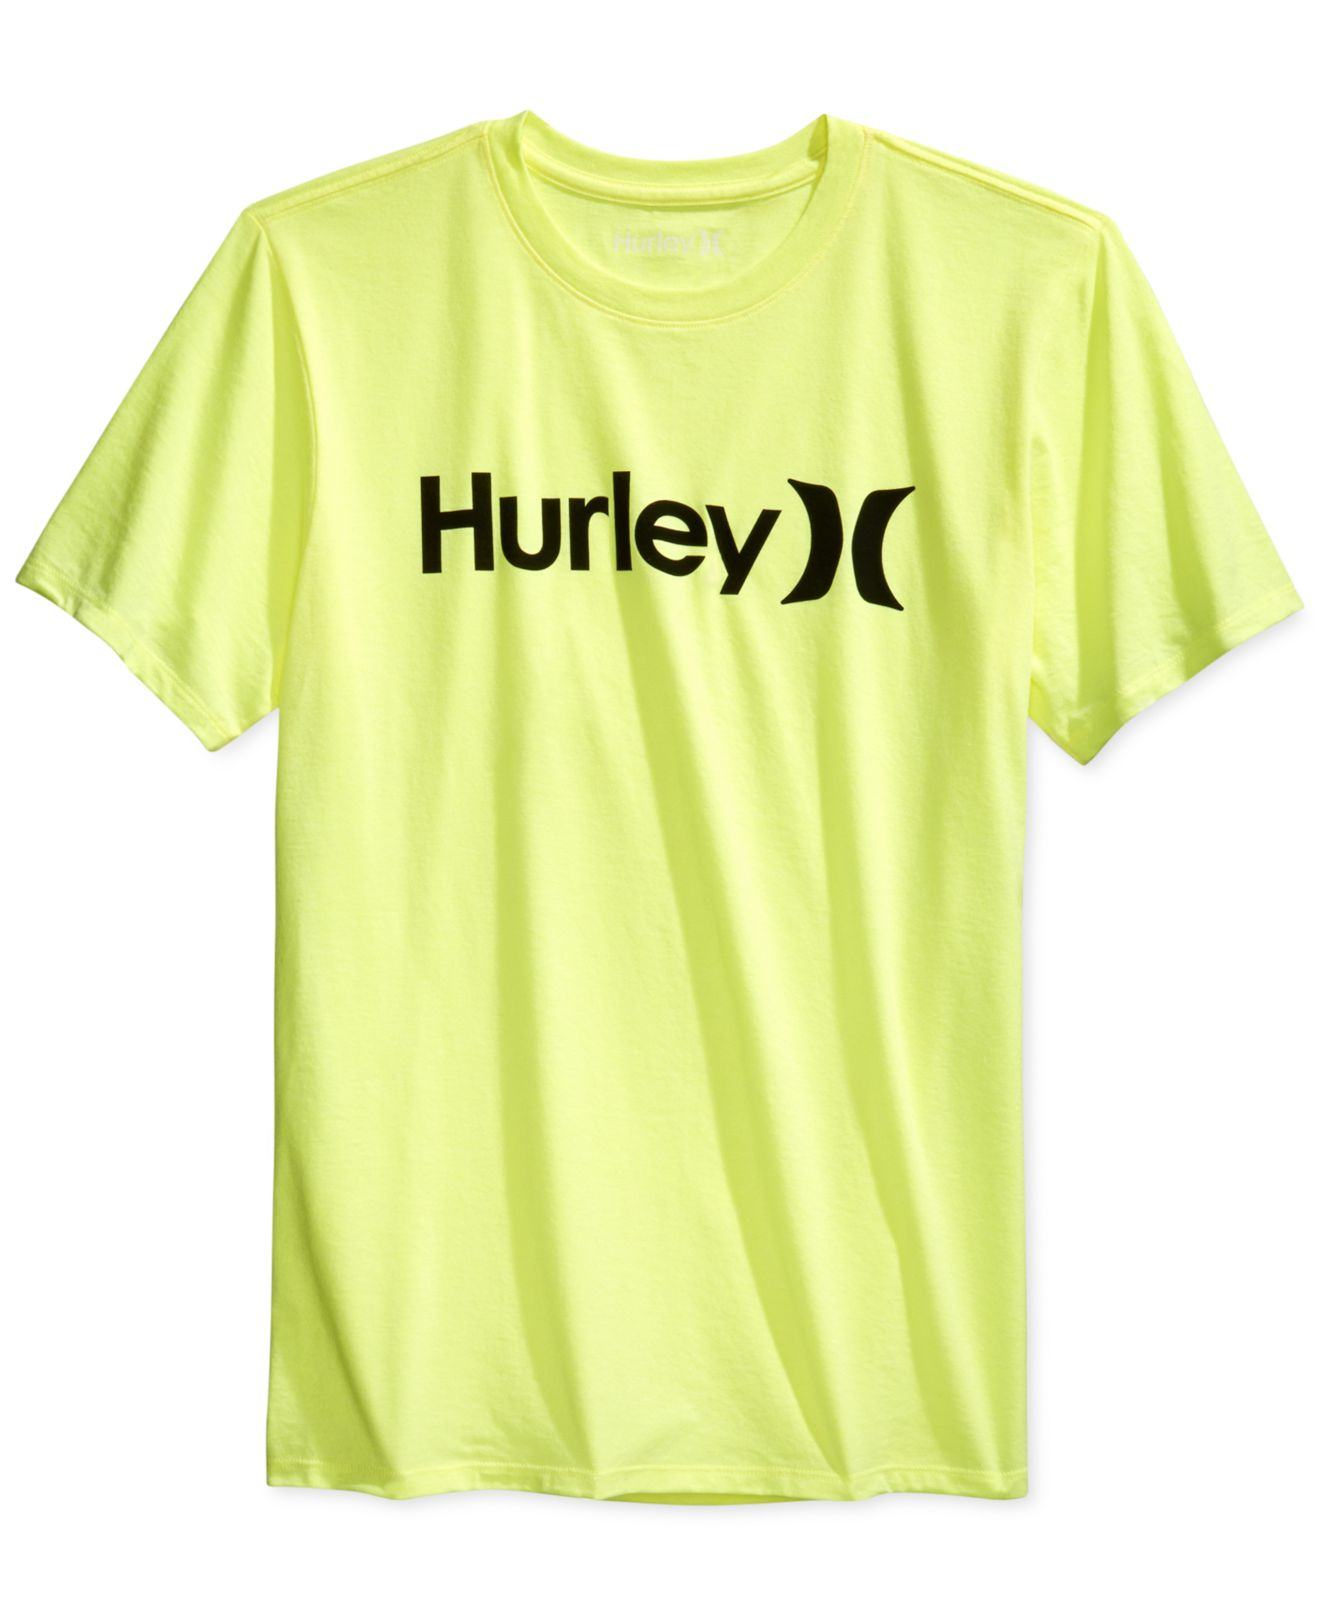 Lyst - Hurley One & Only Color Premium T-shirt in Yellow for Men